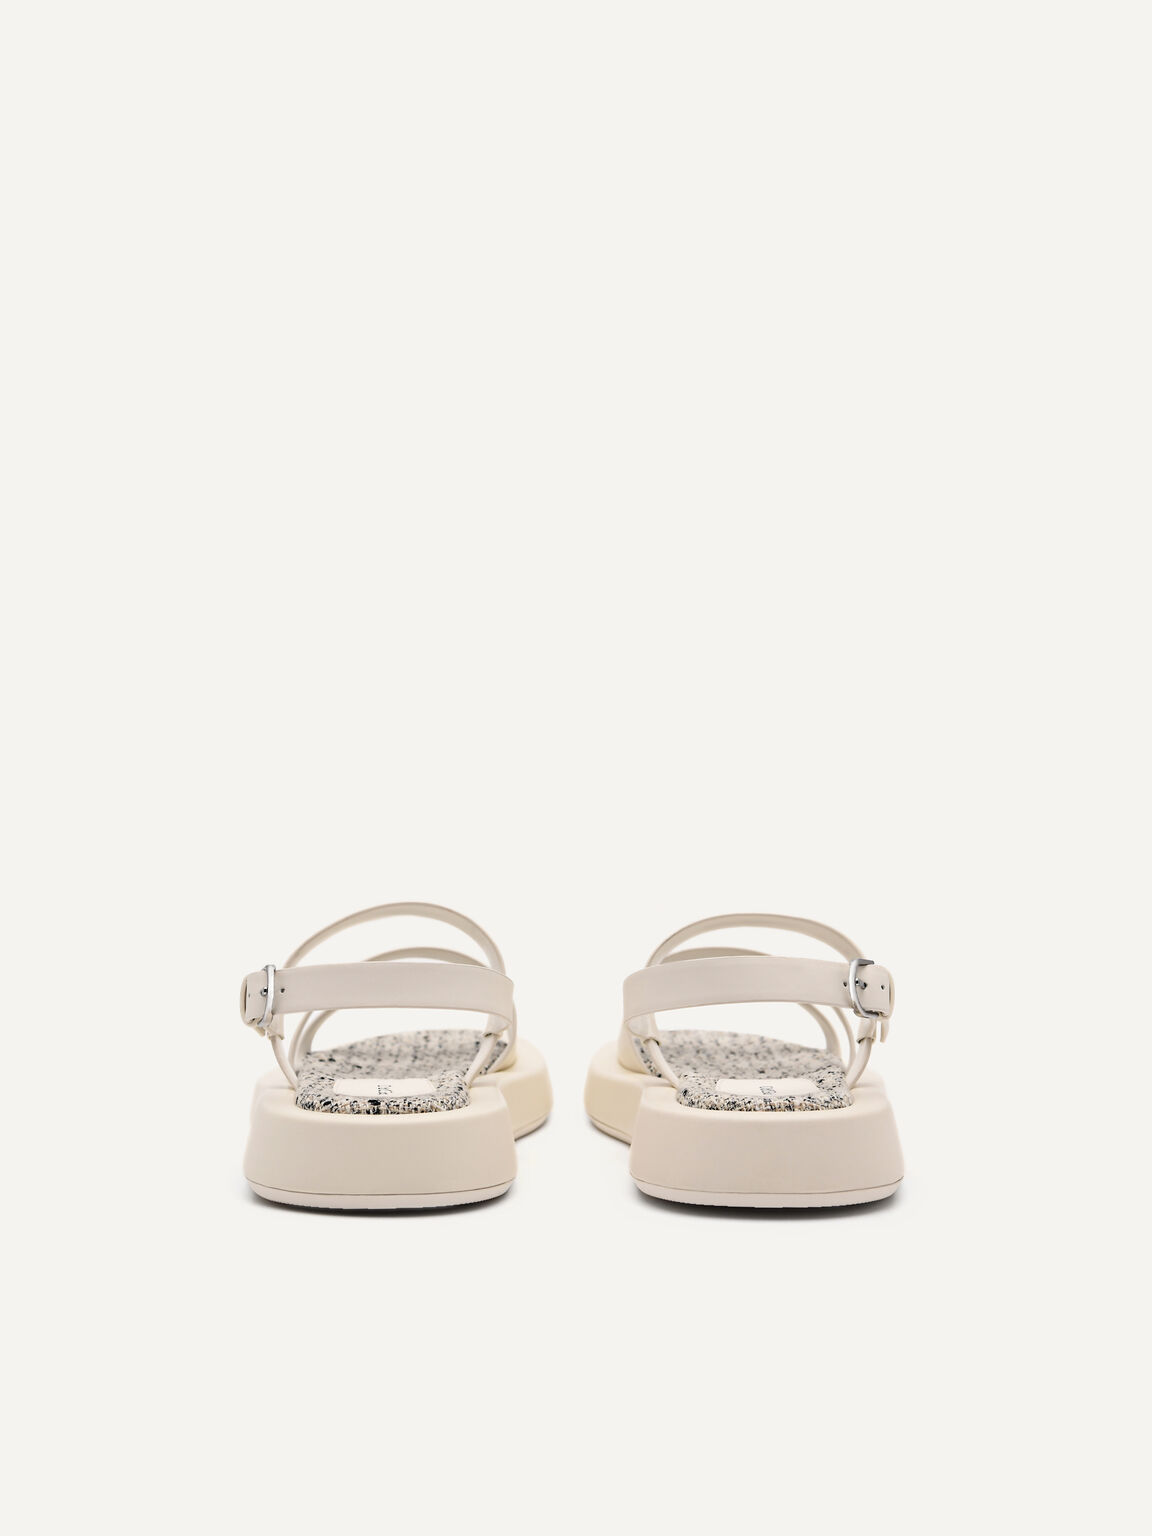 Cube Strappy Sandals, Chalk